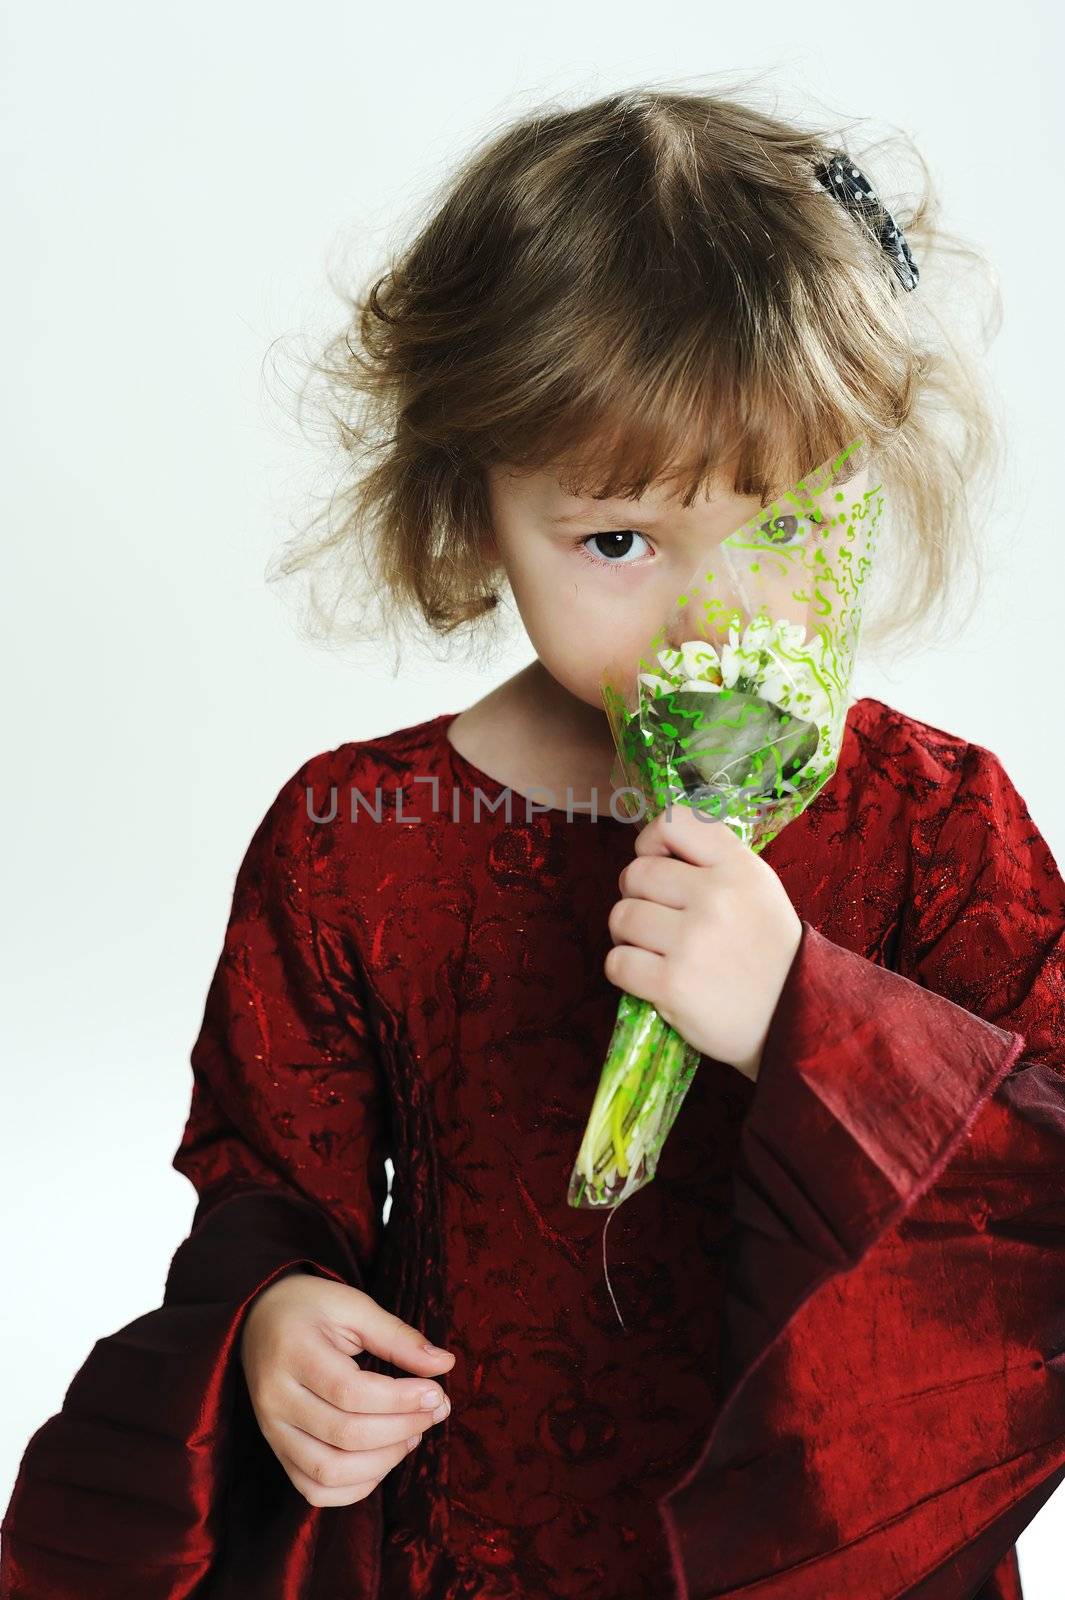 An image of a little girl with white flowers